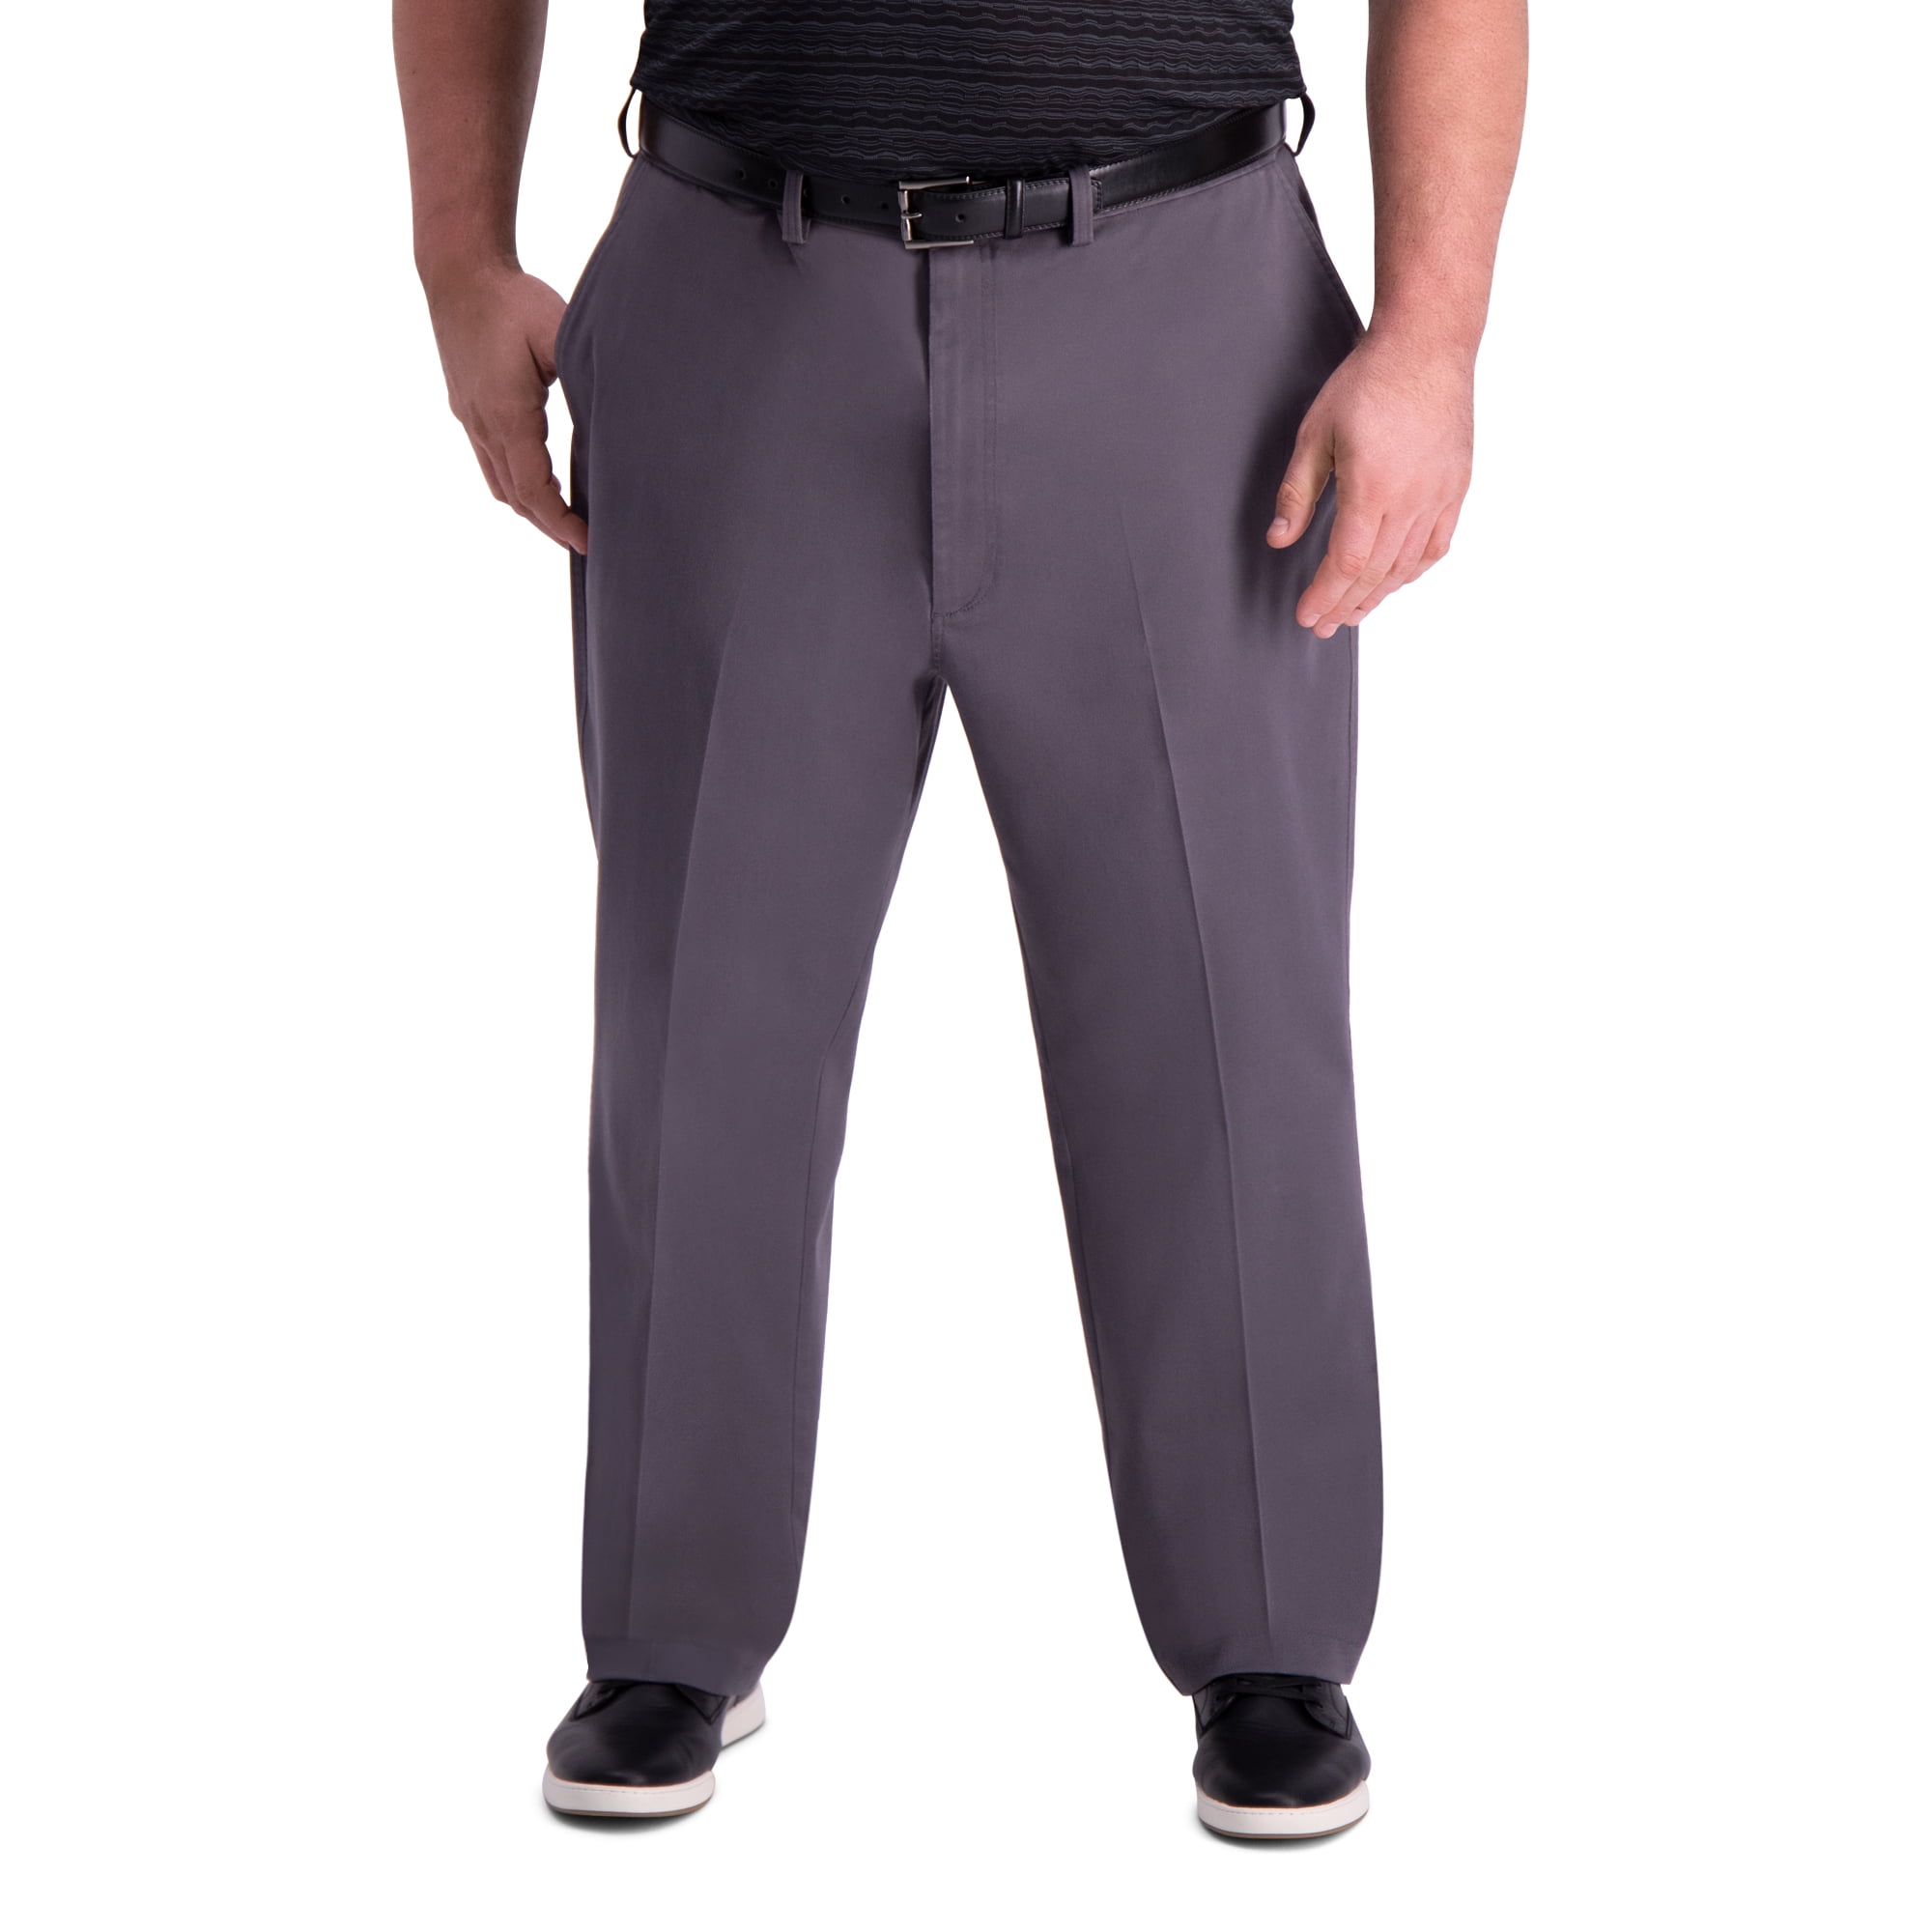 Umpire PlateCombo Pants  Cliff Keen Athletic